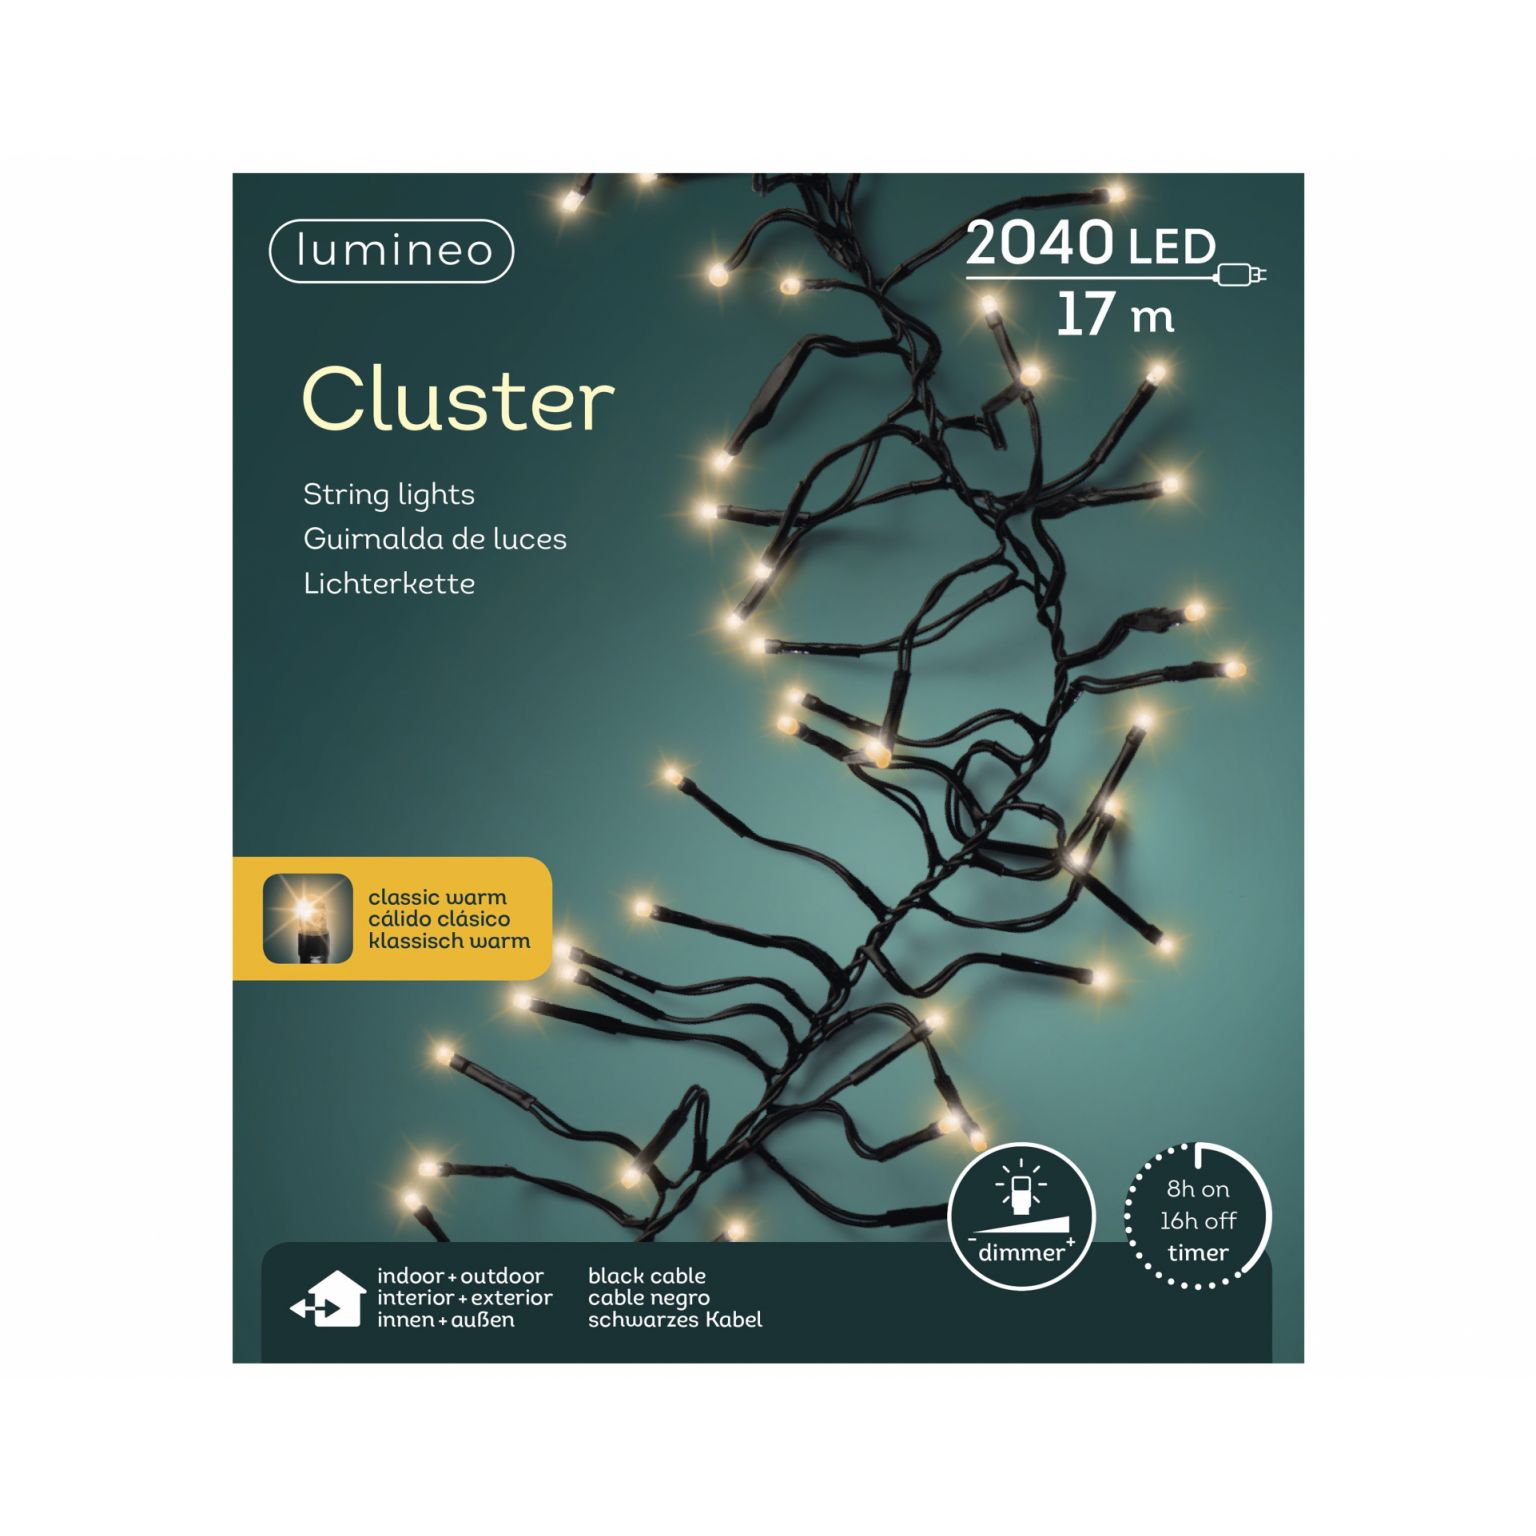 Clusterverlichting lumineo 2040-lamps LED 'classic warm